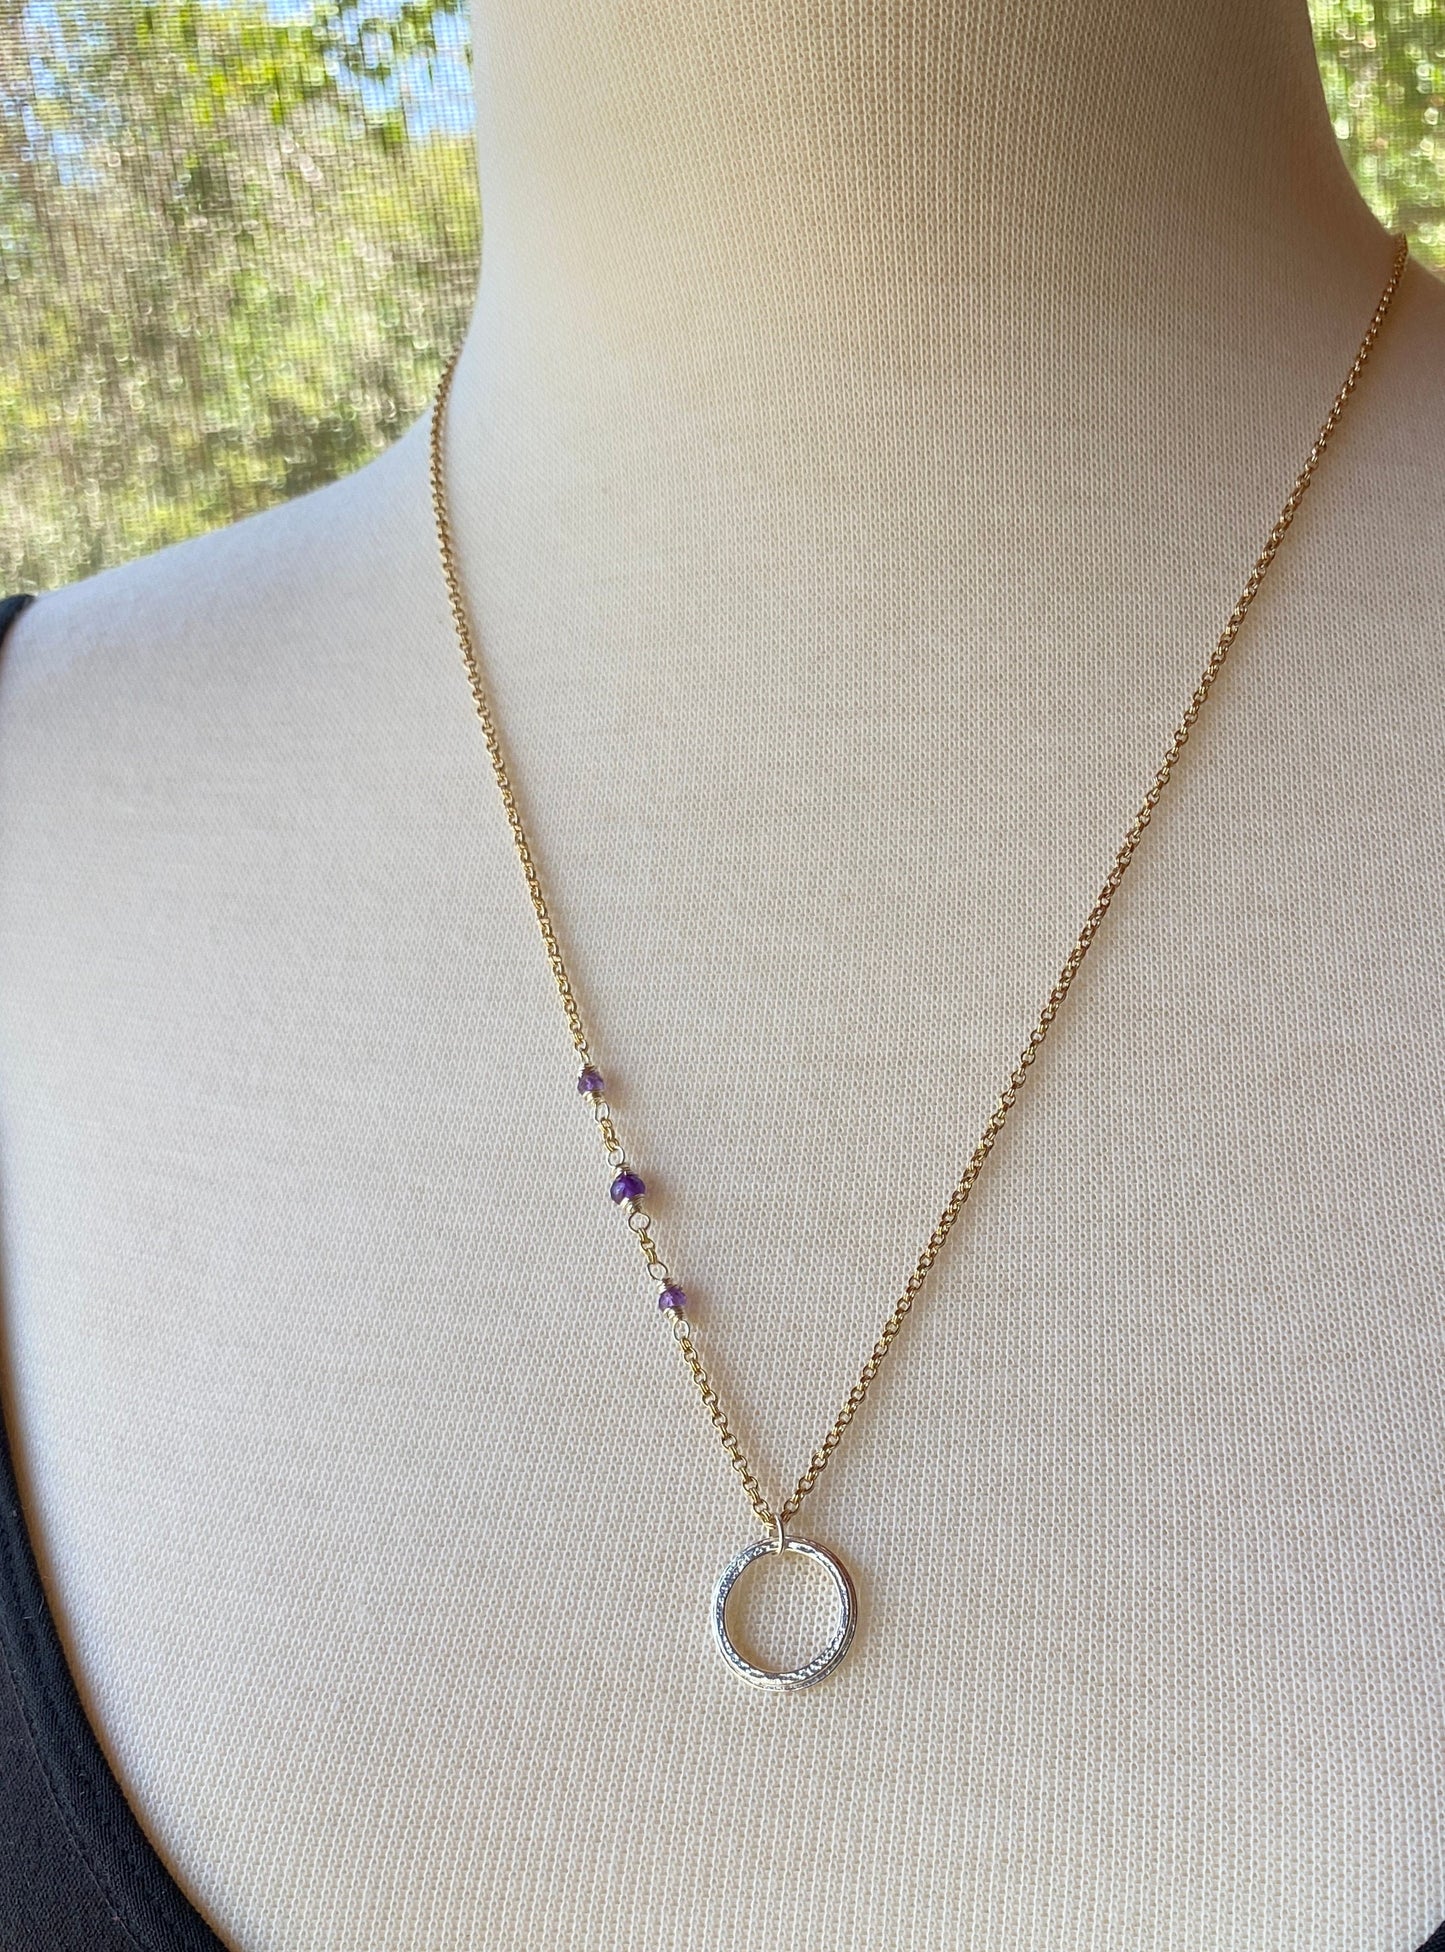 20th Mixed Metal Minimalist Milestone Birthday Necklace with Birthstones, 2 Rings for 2 Decades Sparkly 2 Circles Necklace, Friendship